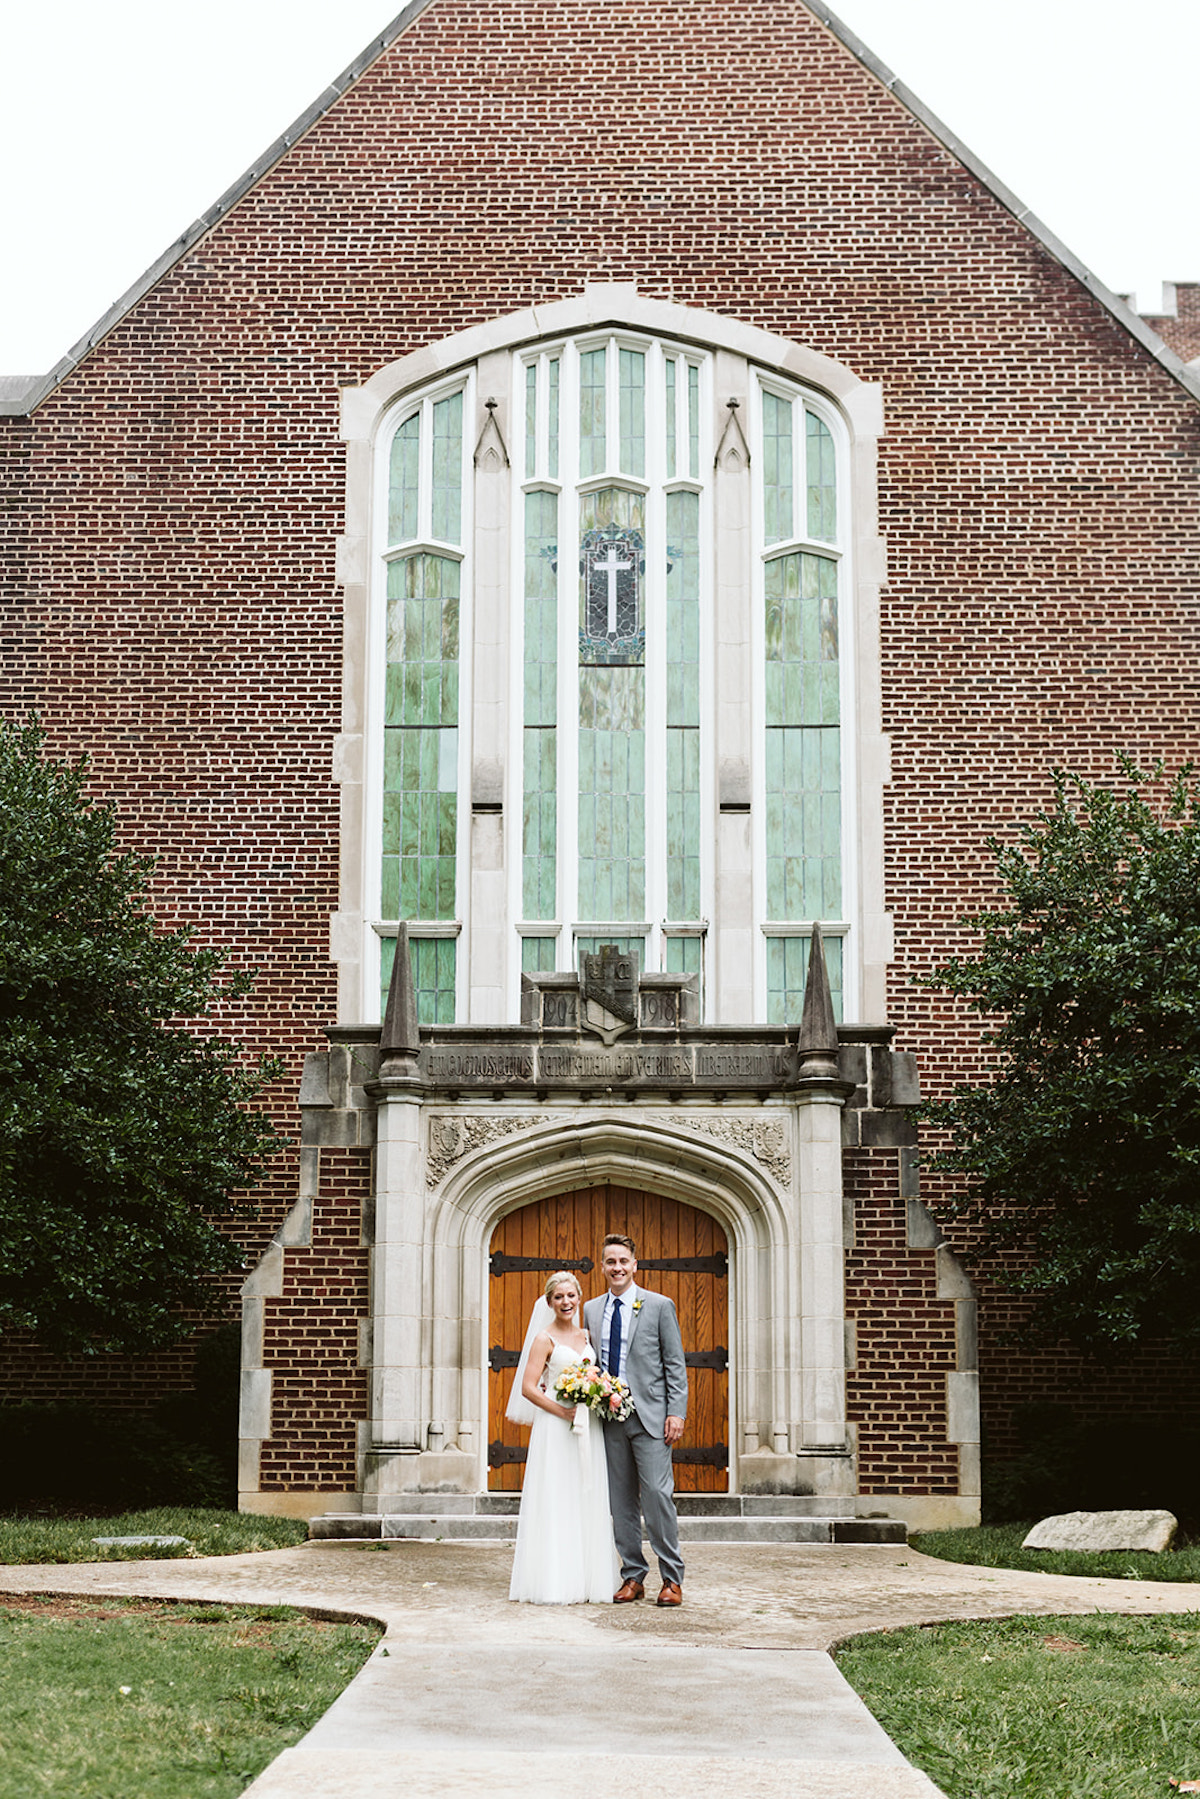 Bride and groom stand in front of Patten Chapel's wooden front door, brick exterior, and tall stained glass windows